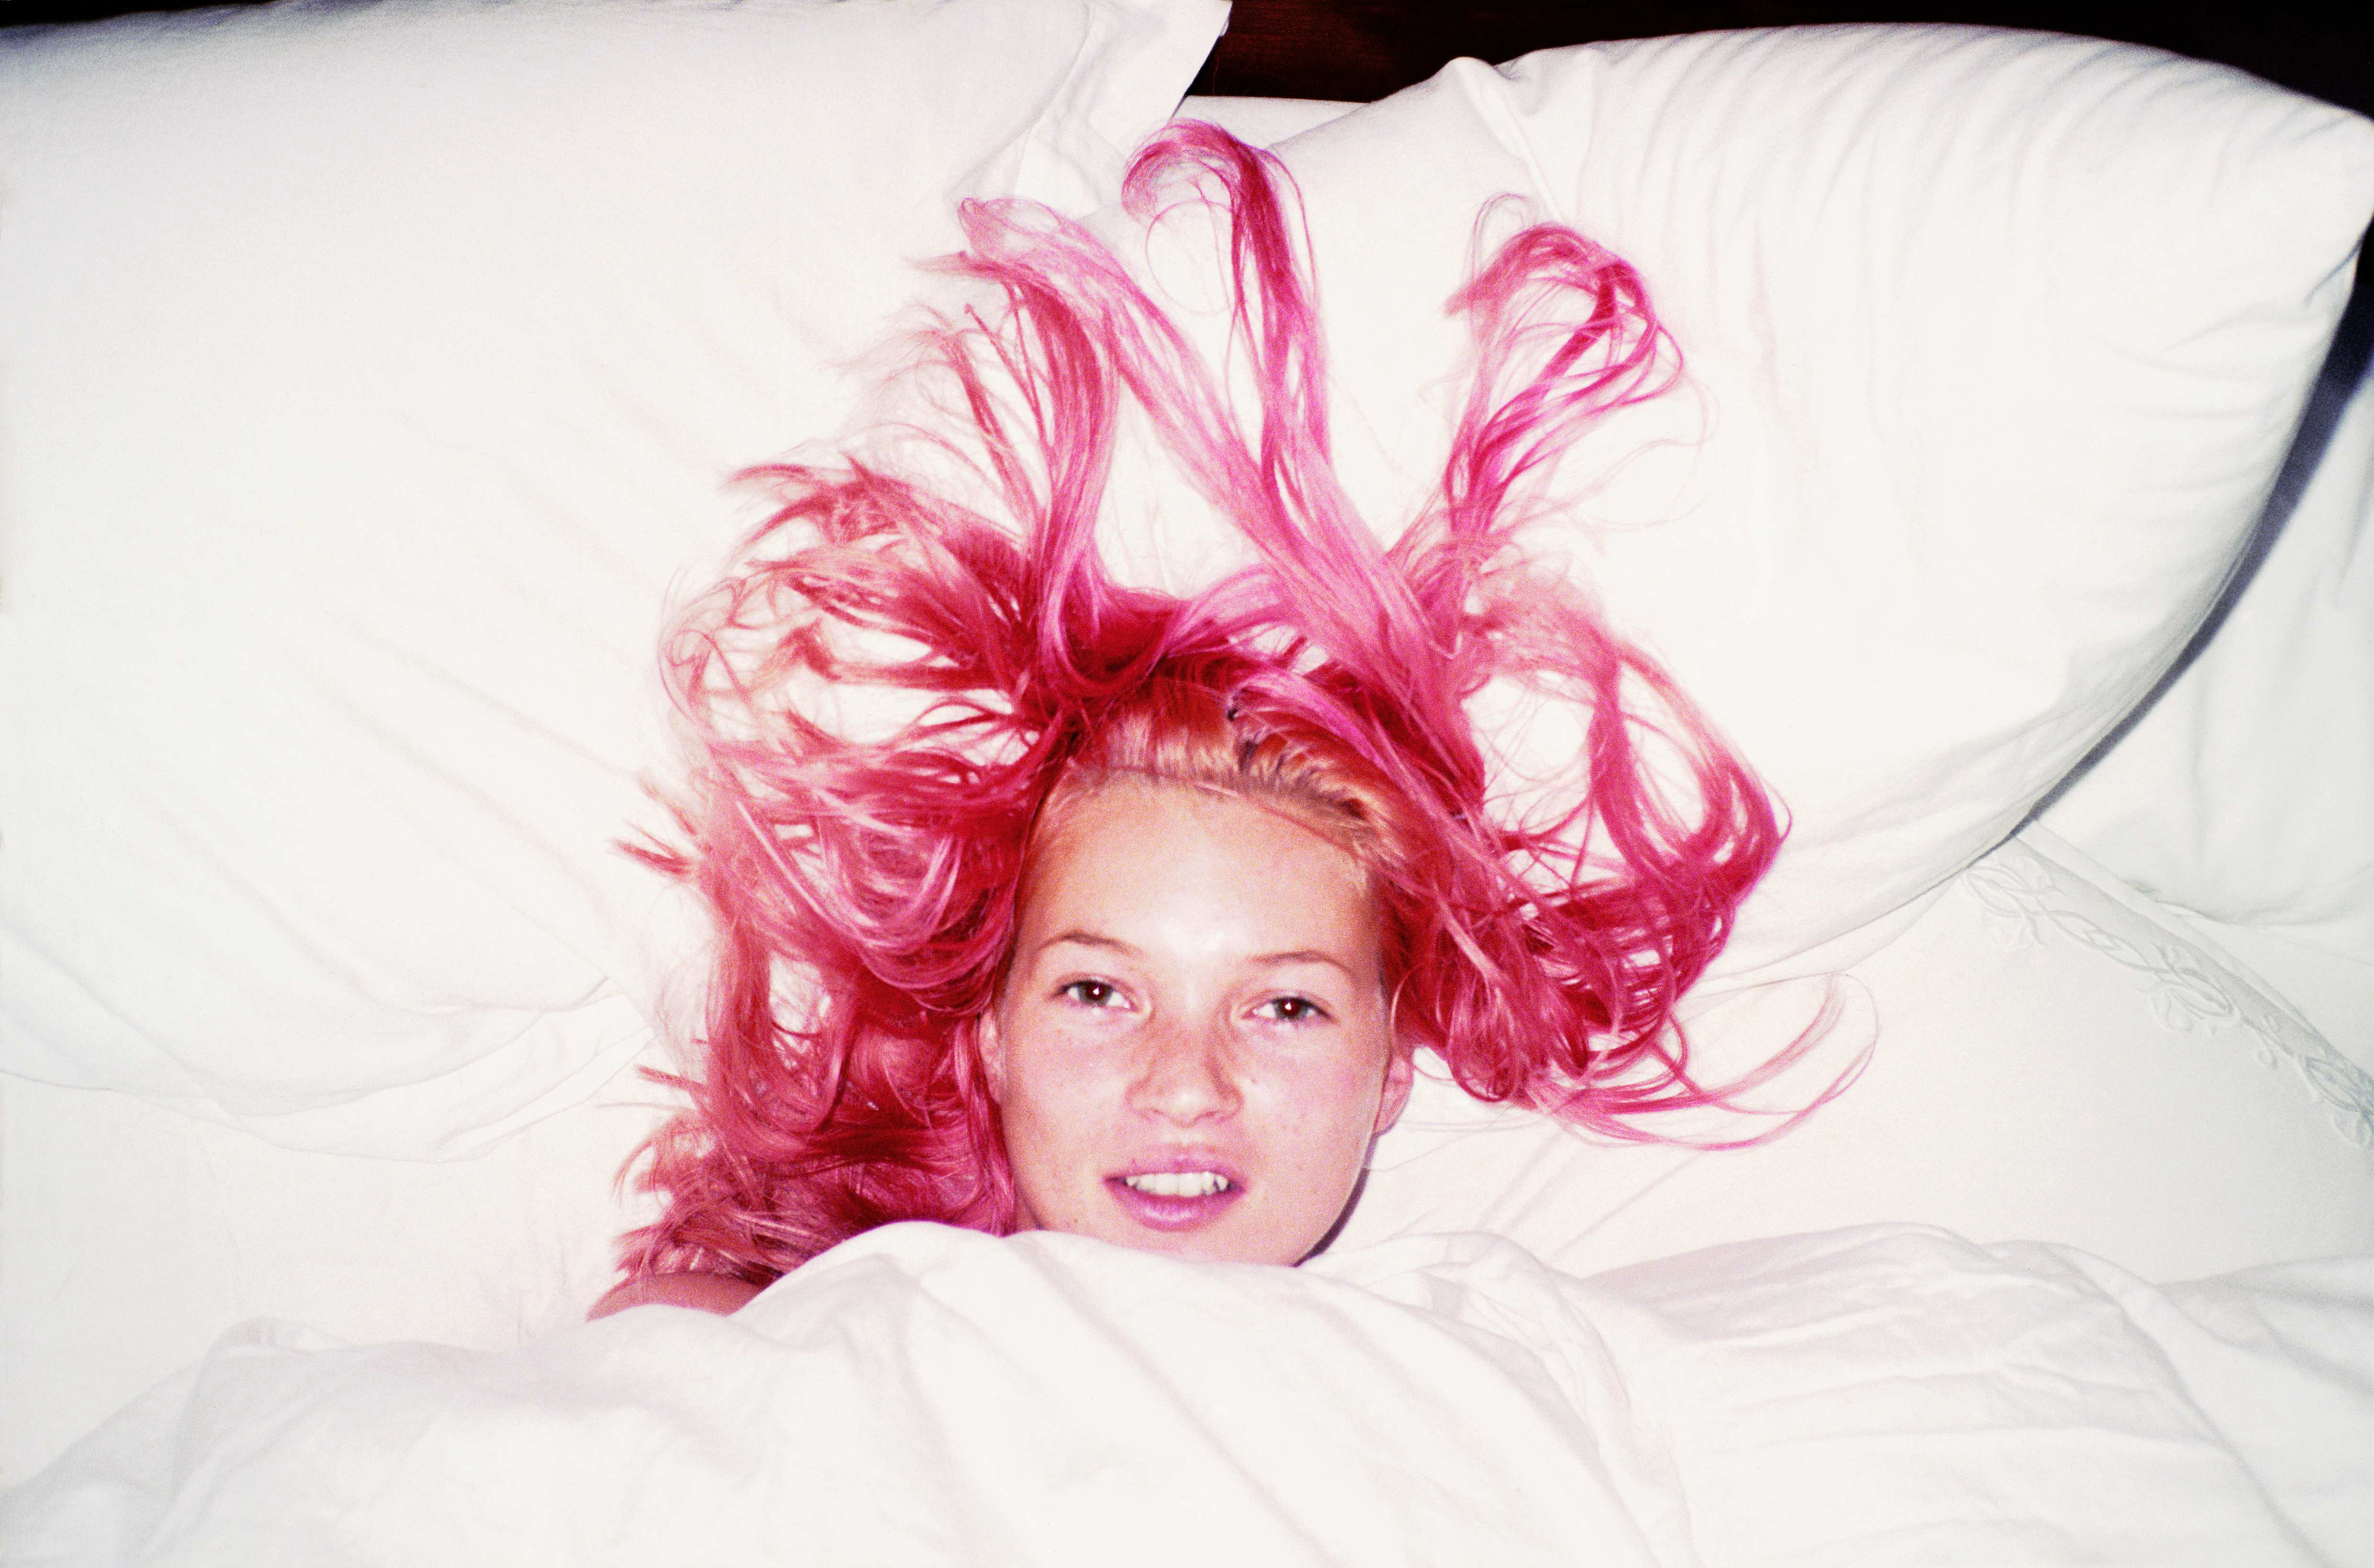 kate moss lying in bed with pink hair by juergen teller 1998